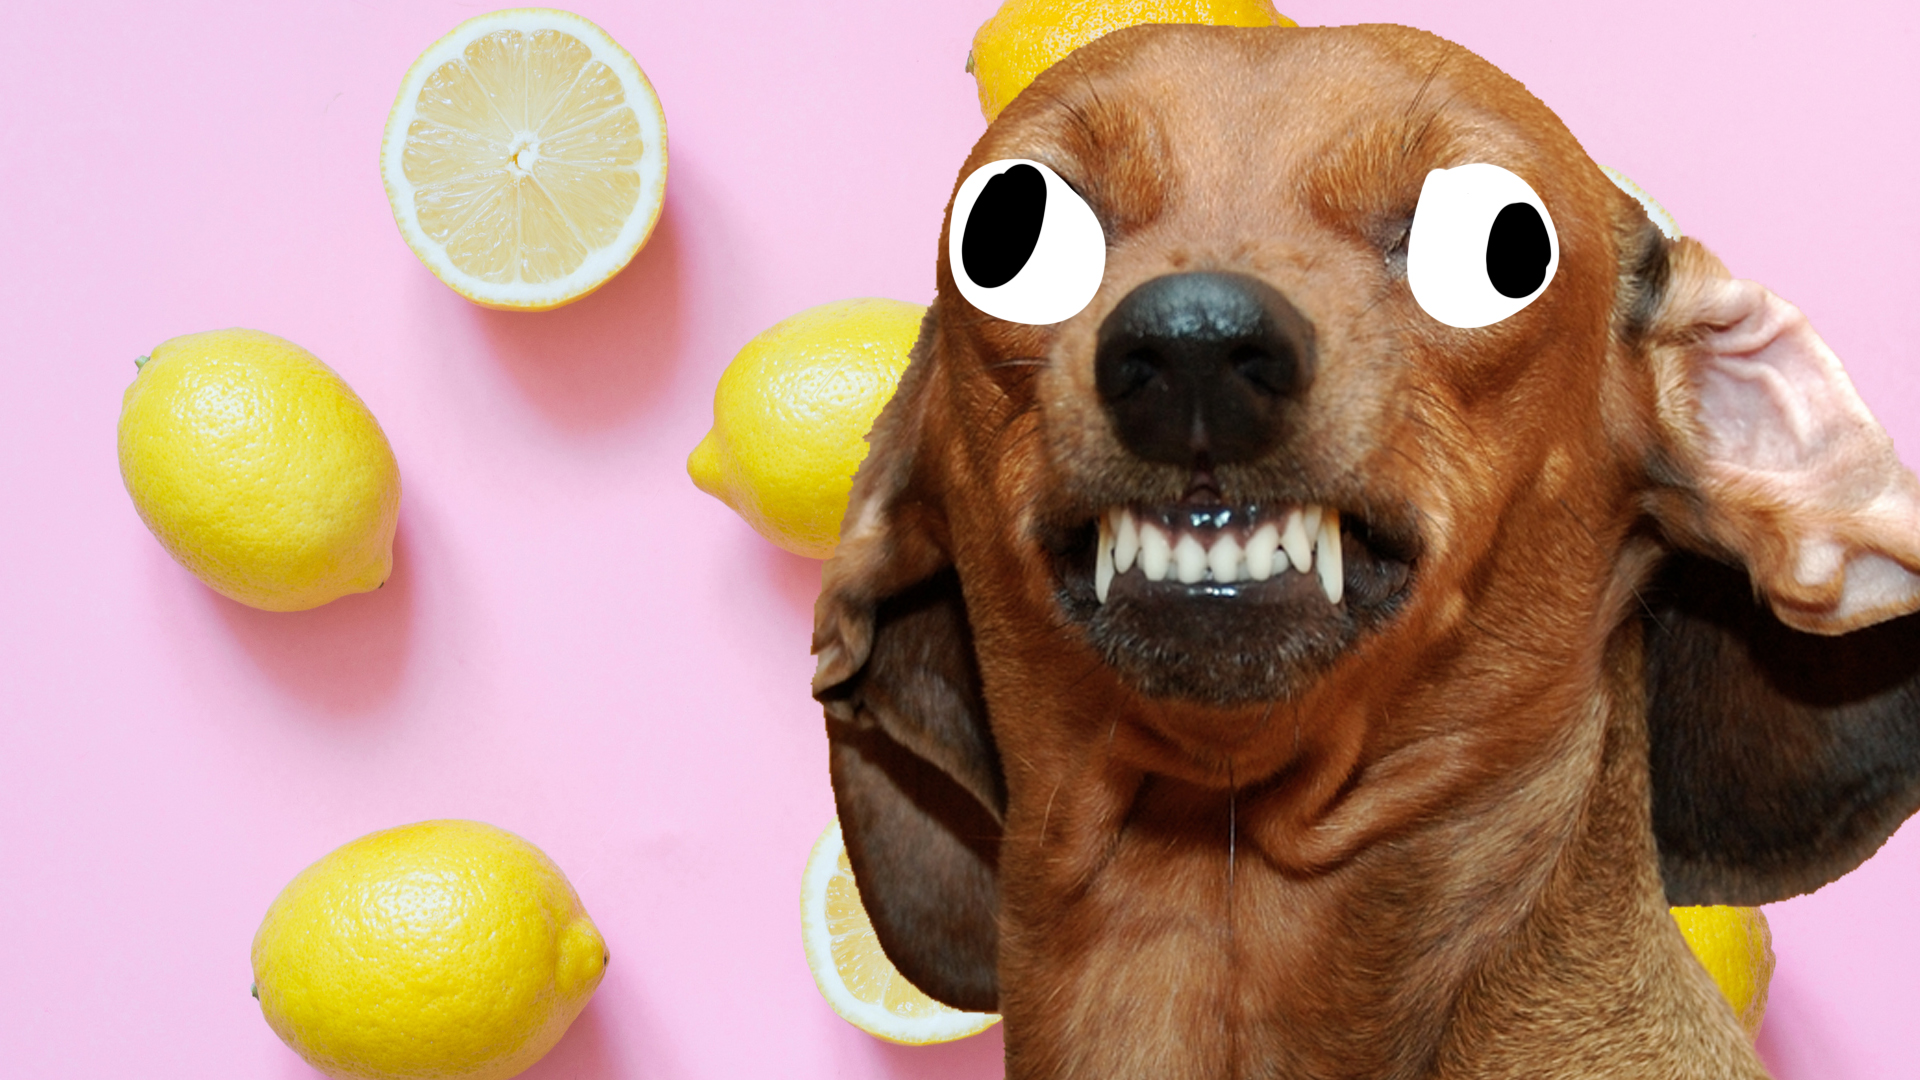 A dog who looks like they've licked one of the lemons in the photo